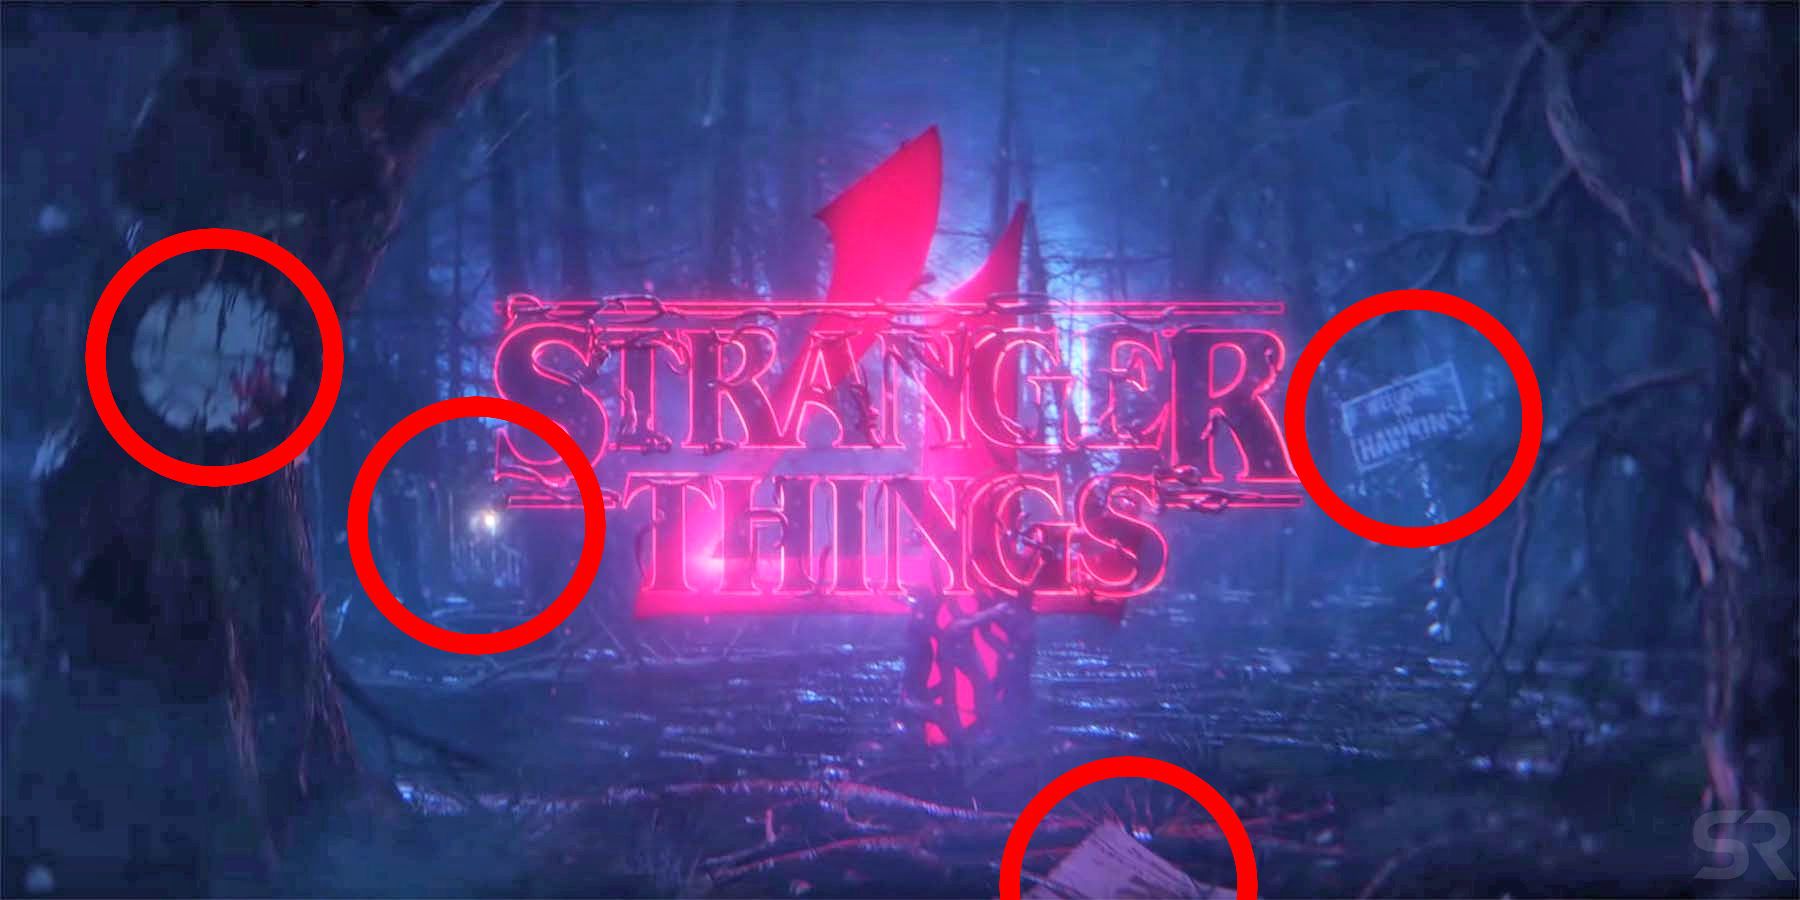 Every Clue You Missed in the 'Stranger Things' Season 4 Teaser Posters